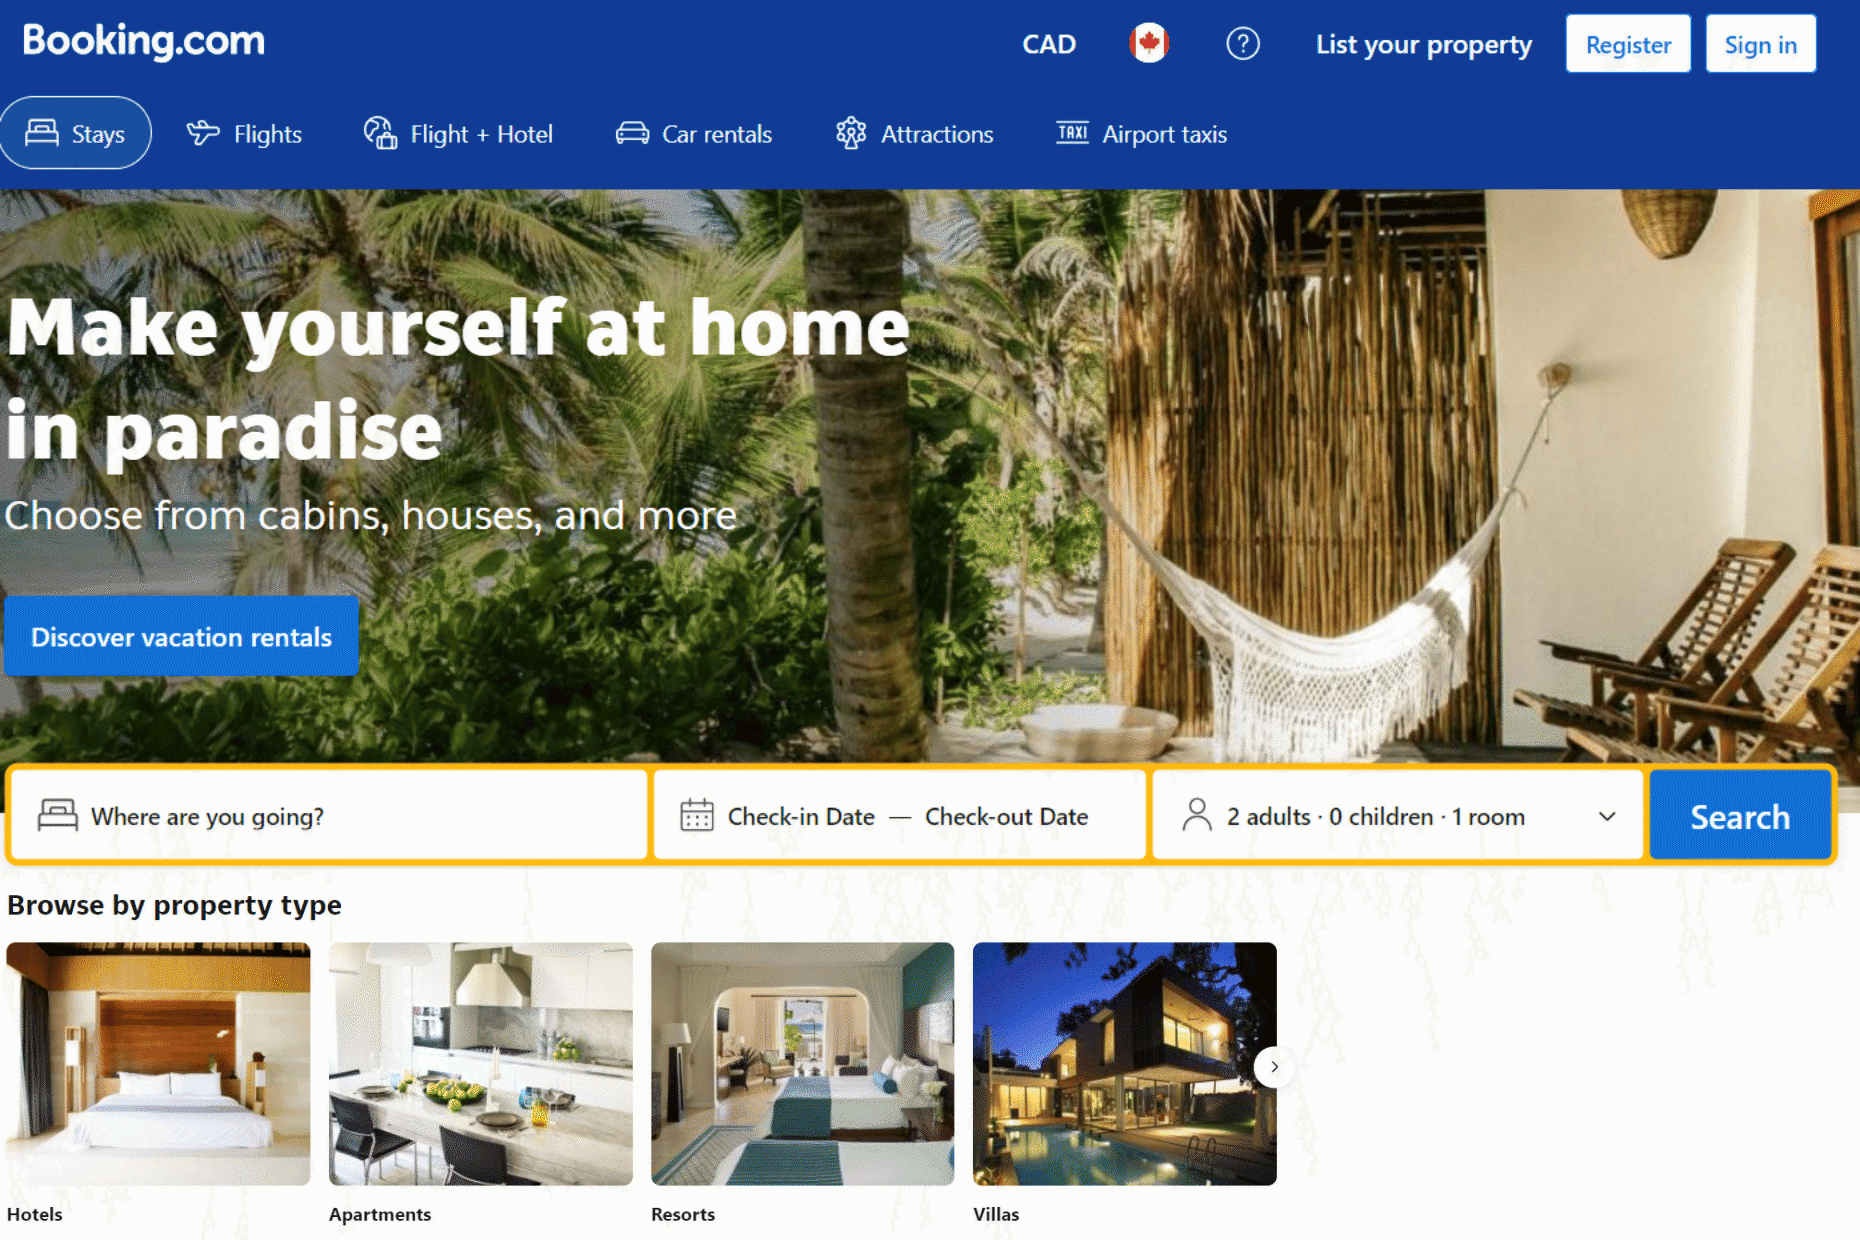 <p><a href="http://booking.com">Booking.com</a> lets travellers choose from a wide range of accommodations including hotels, hostels, bed-and-breakfasts and Airbnb-style rentals. Look at location information, photos and reviews; book on the site; and pay at the hotel (or hostel, or homestay) when you arrive. In the event you manage to find a cheaper rate for a booking you’ve made, Booking.com will match it. The site is also known for <a href="https://heretotravel.com/book-hotel-rooms-booking-com/">responsive customer service</a> and a handy mobile app. </p>